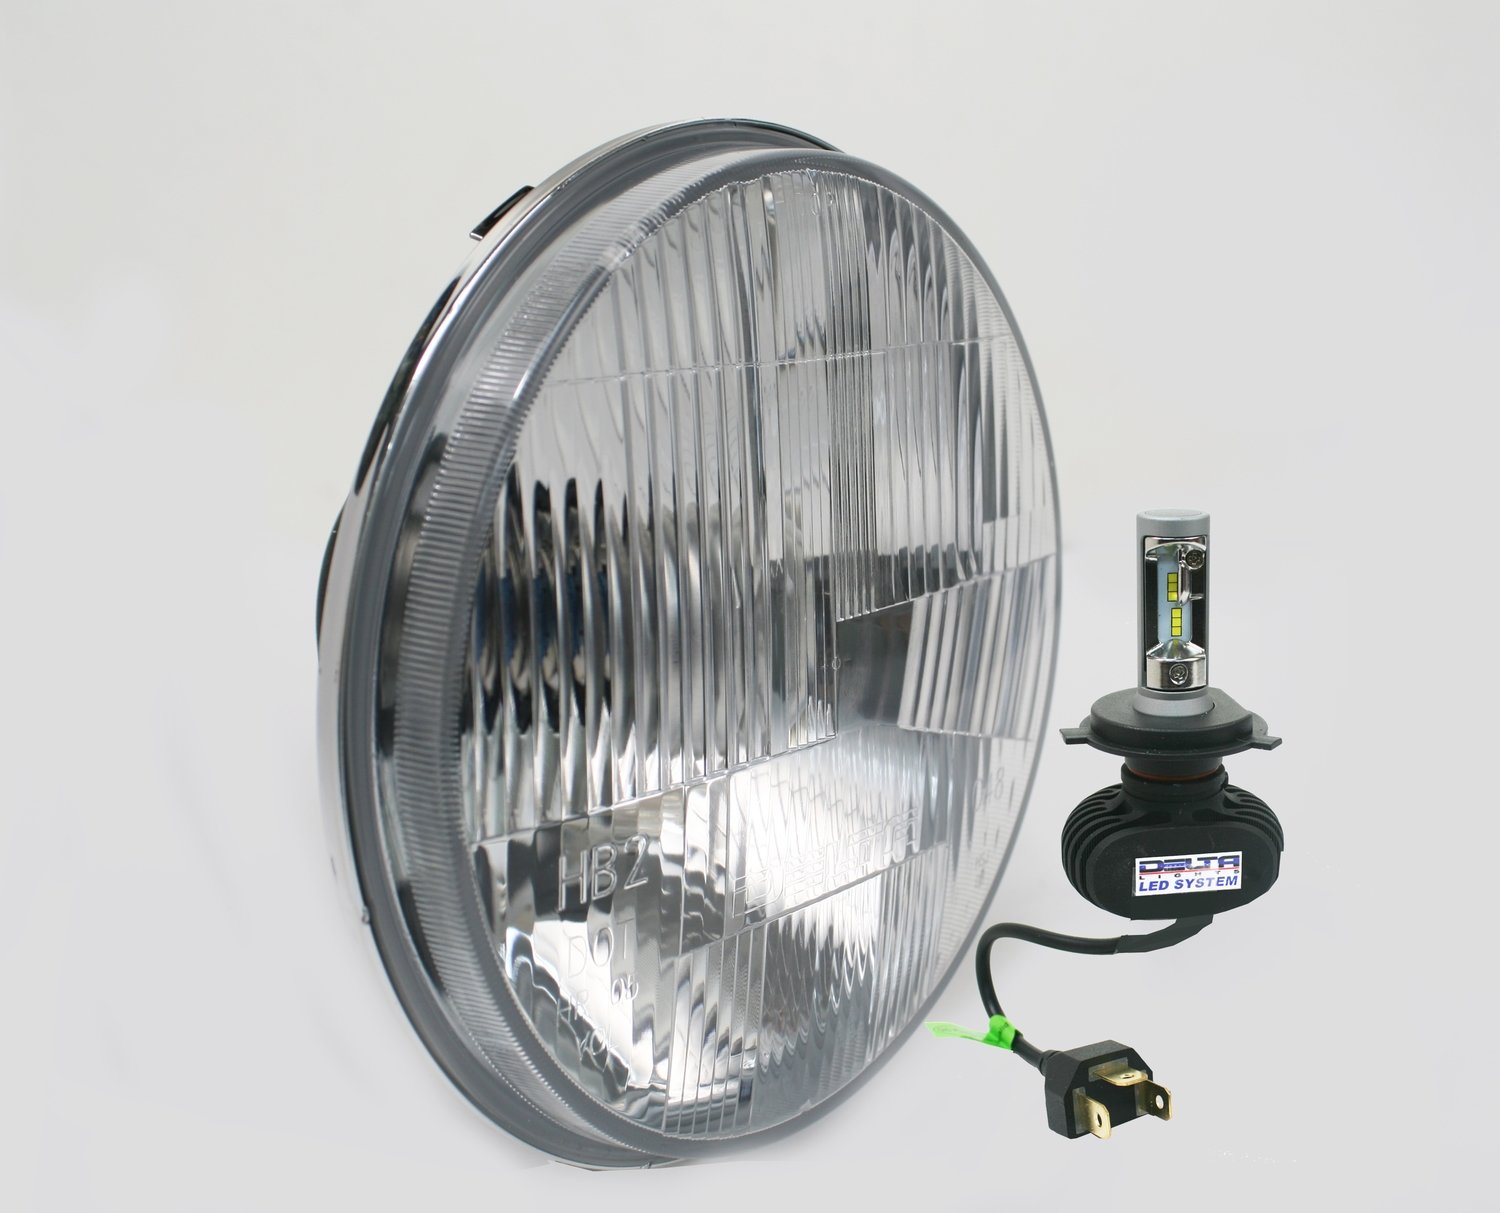 Jeep JK LED Headlight Kit with Lens Defrost Heating Element